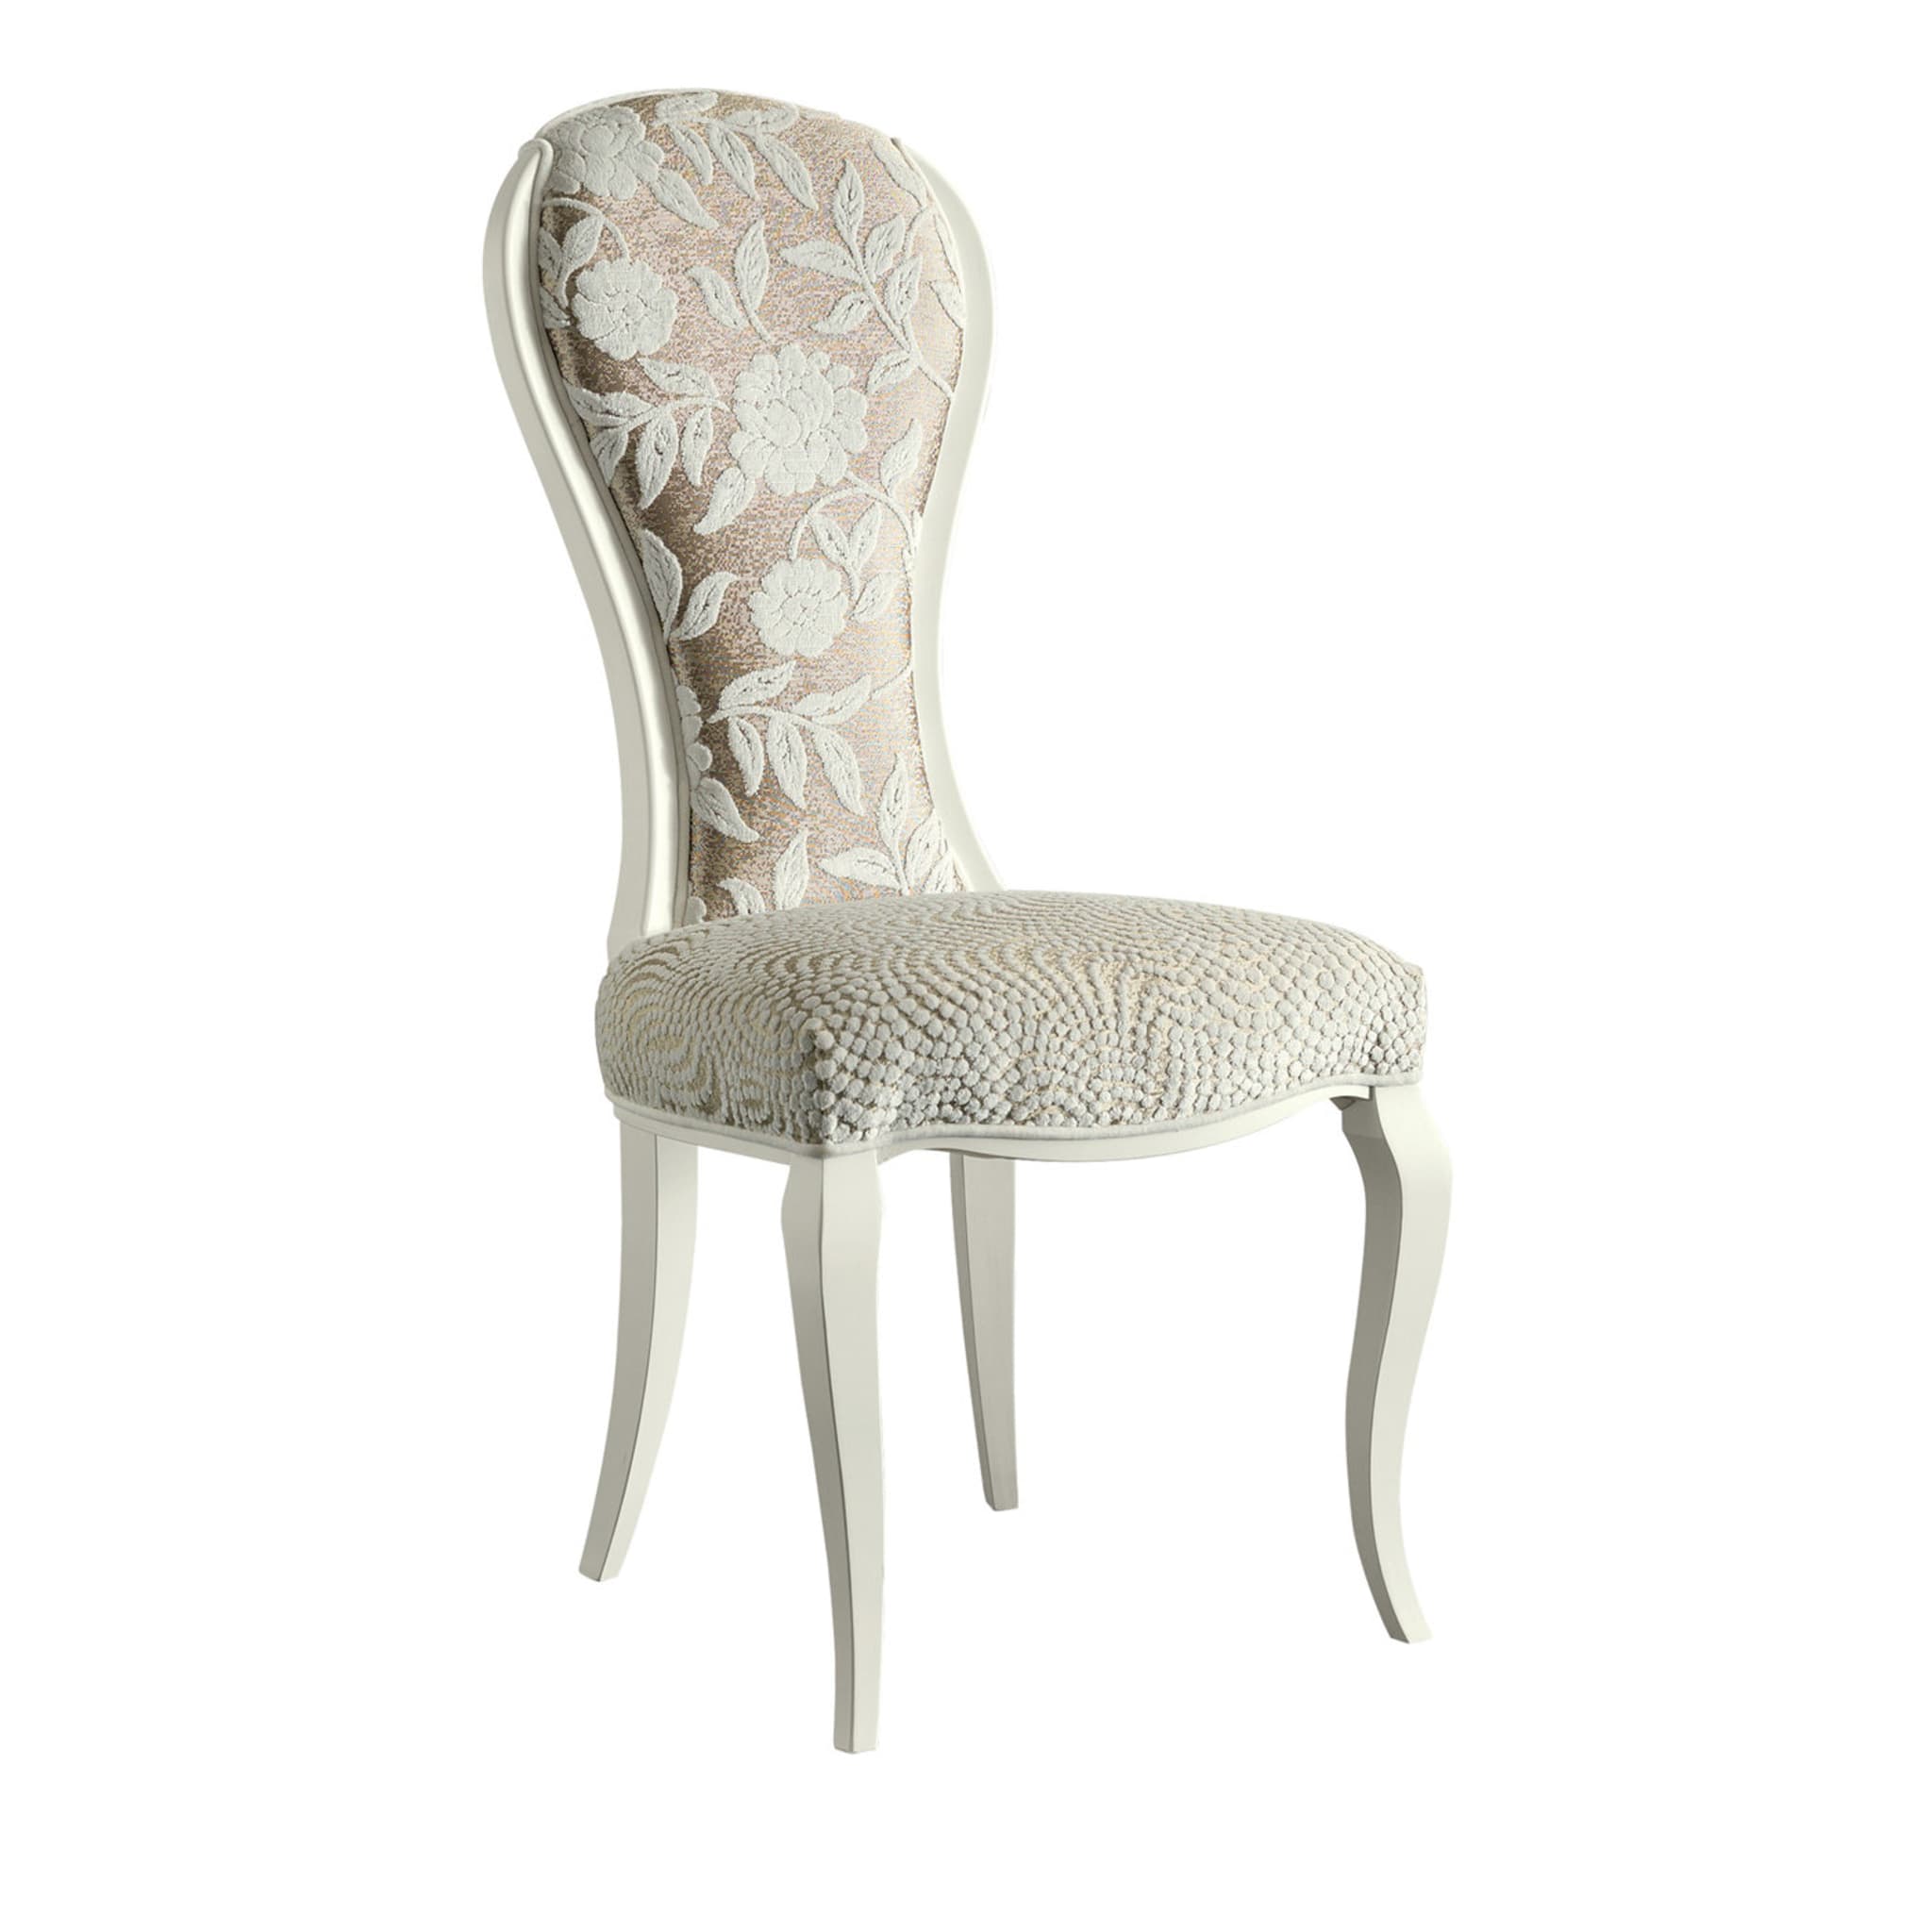 Contemporary White Dining Chair - Main view